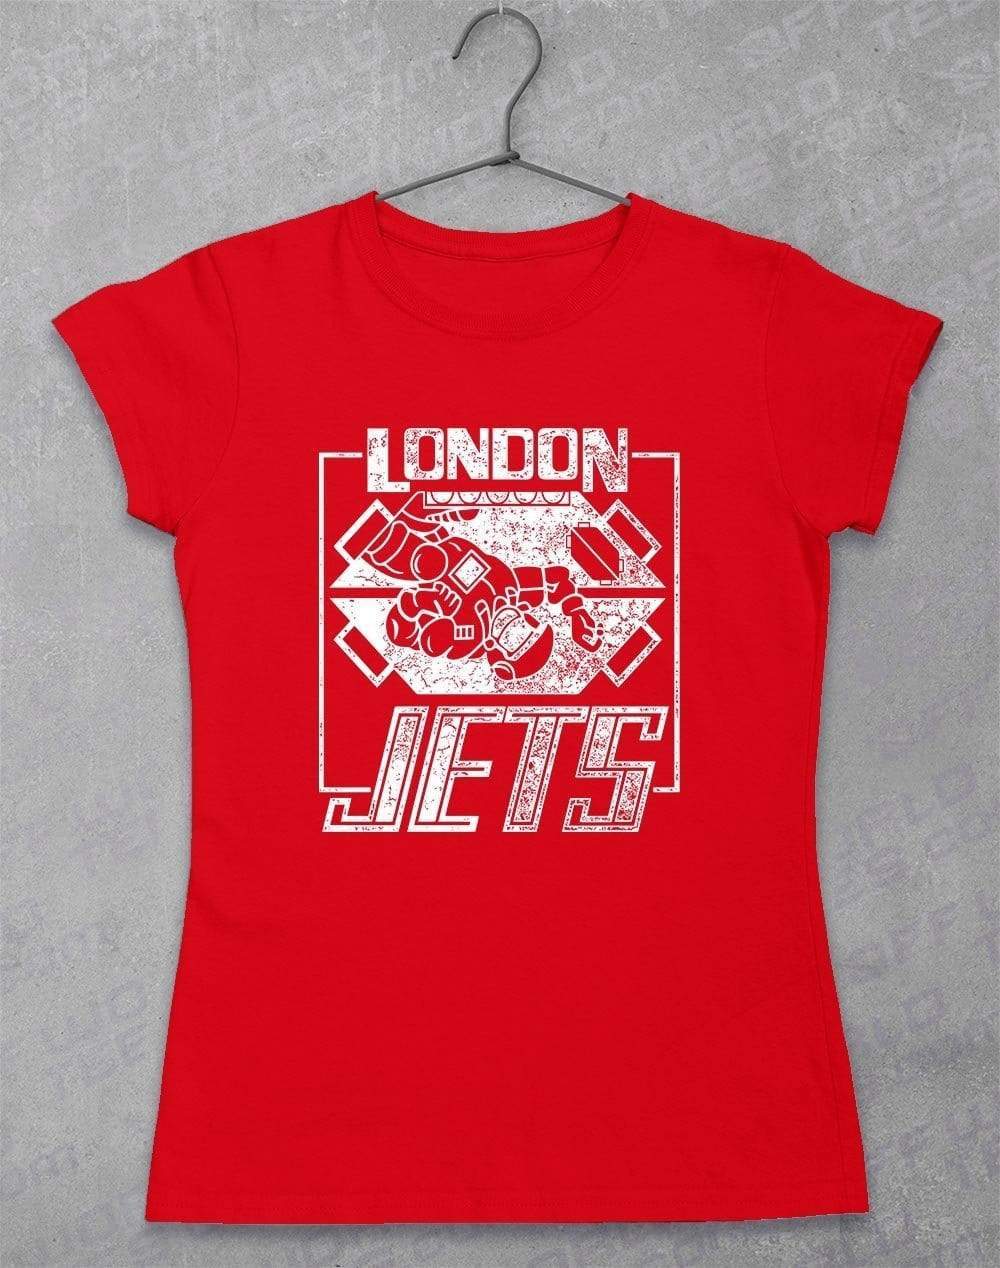 London Jets - Women's T-Shirt 8-10 / Red  - Off World Tees